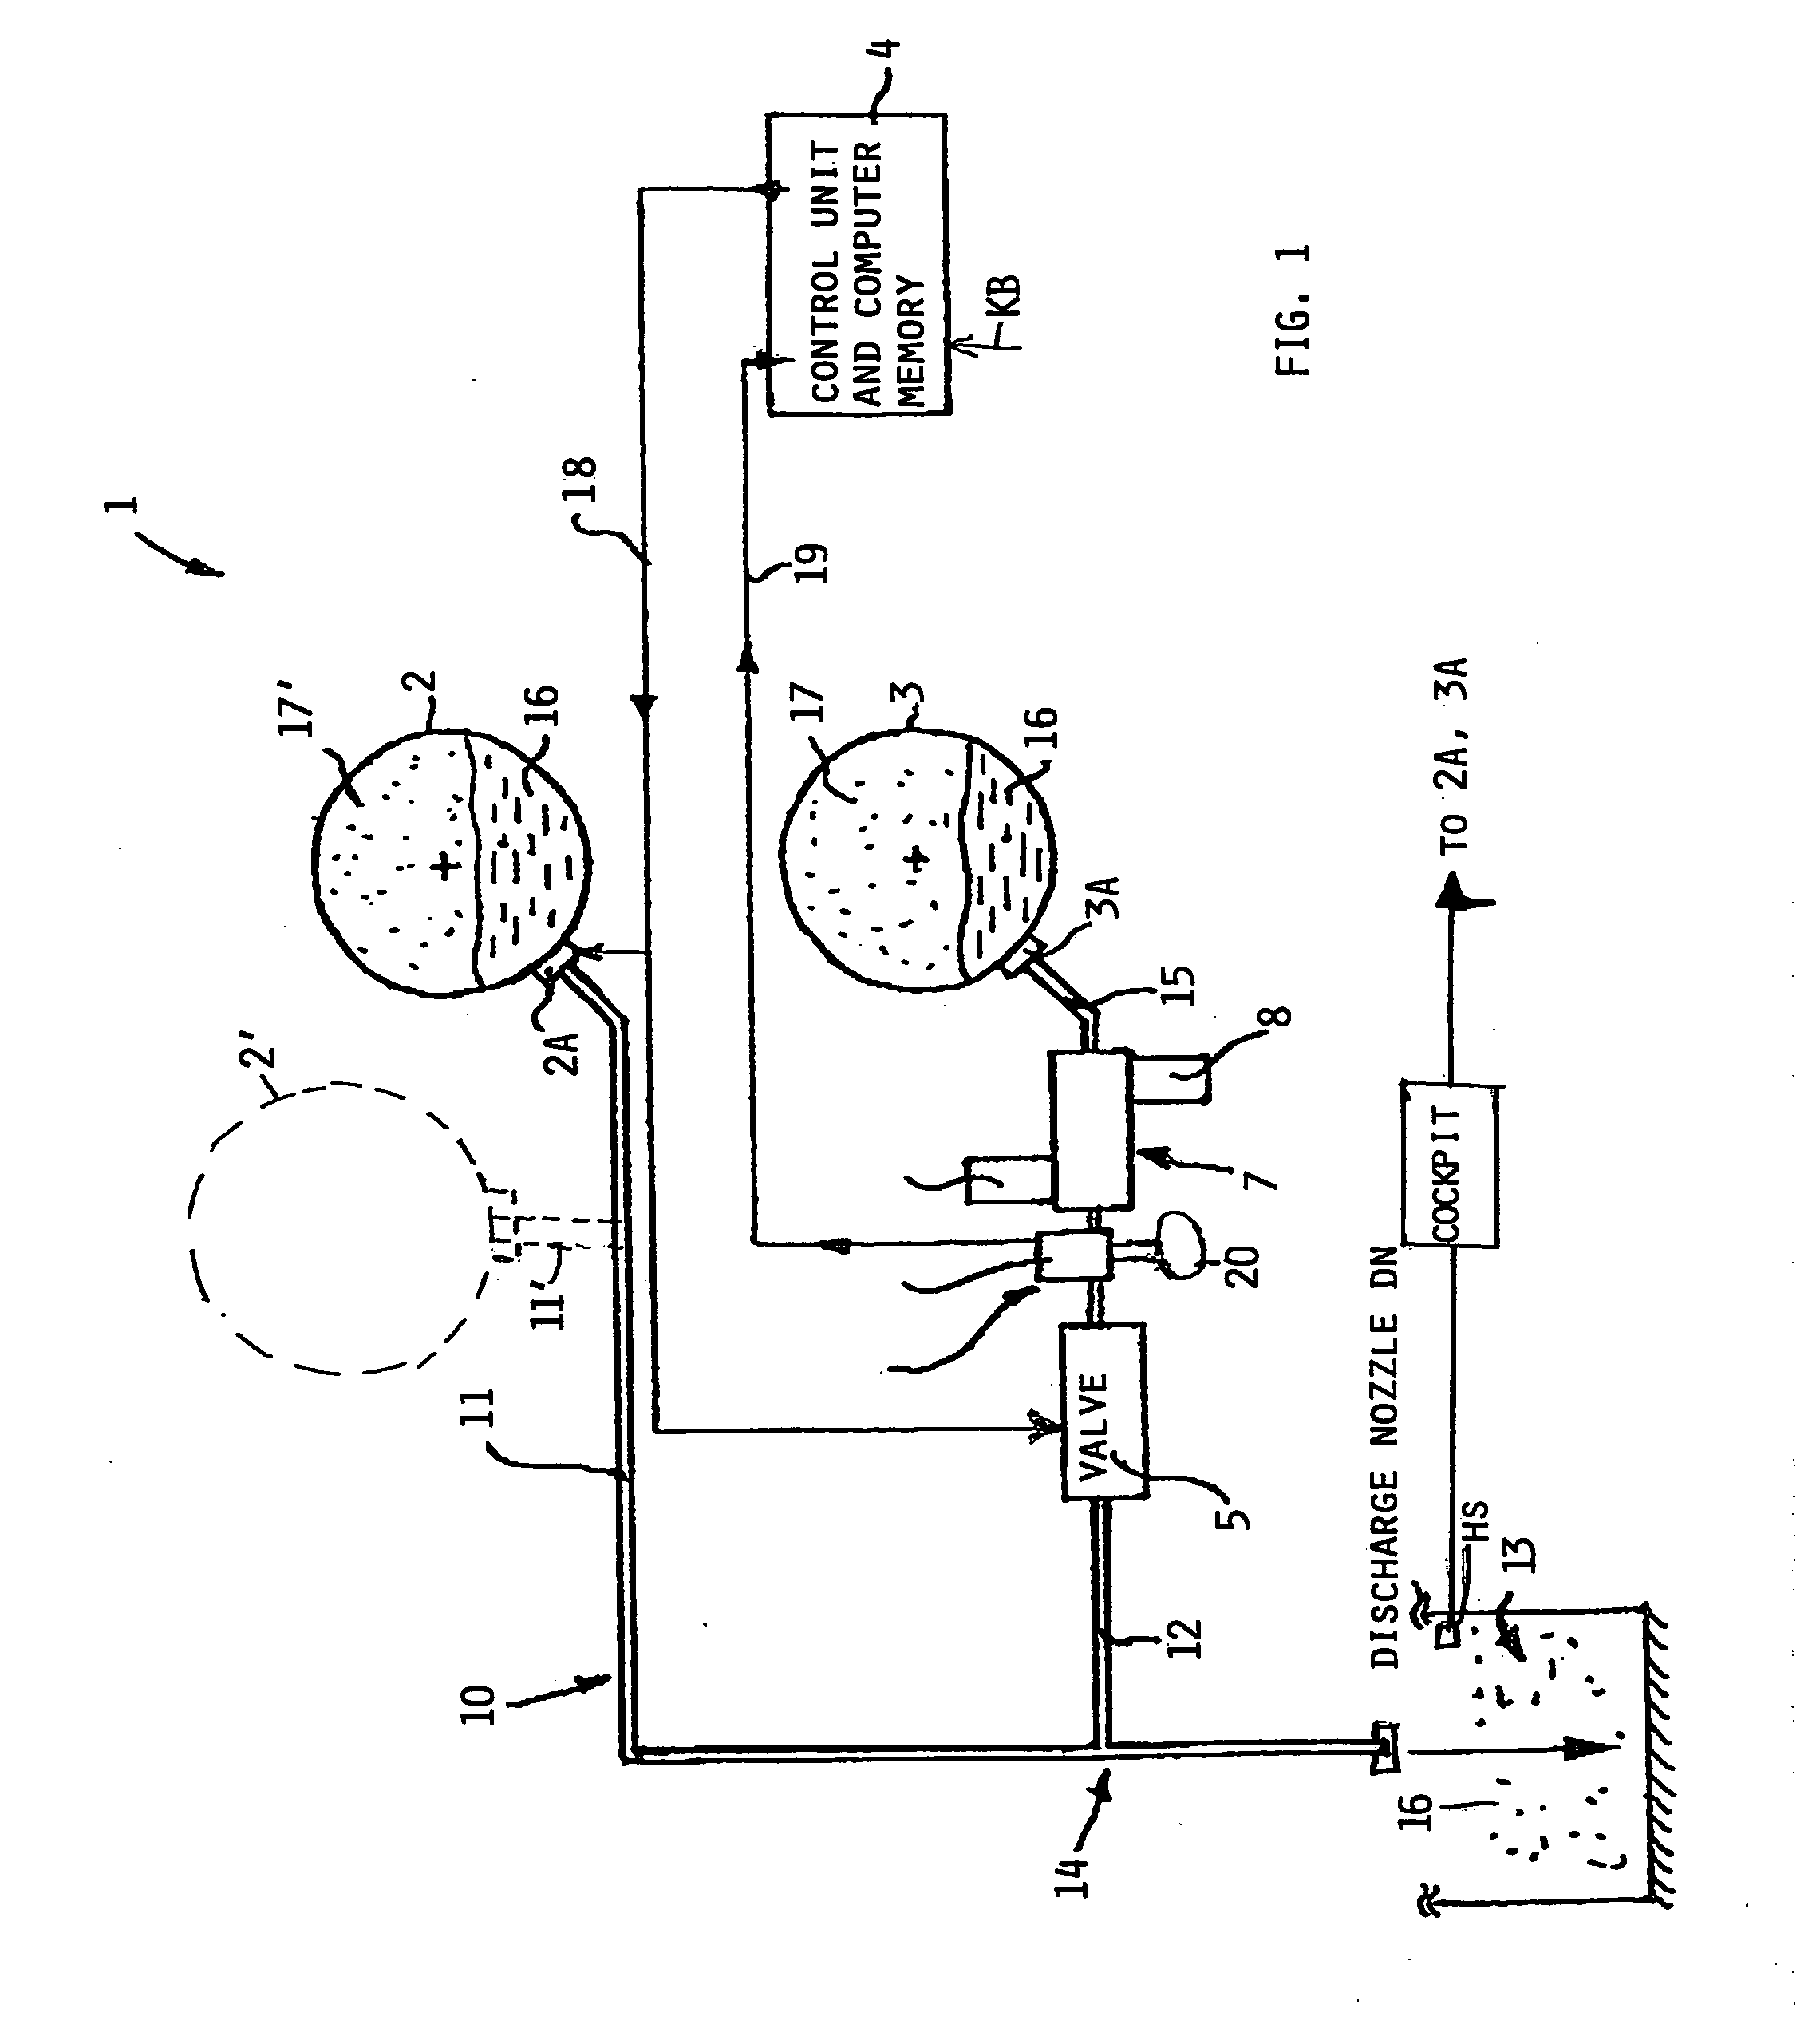 Method and apparatus for extinguishing a fire in an enclosed space